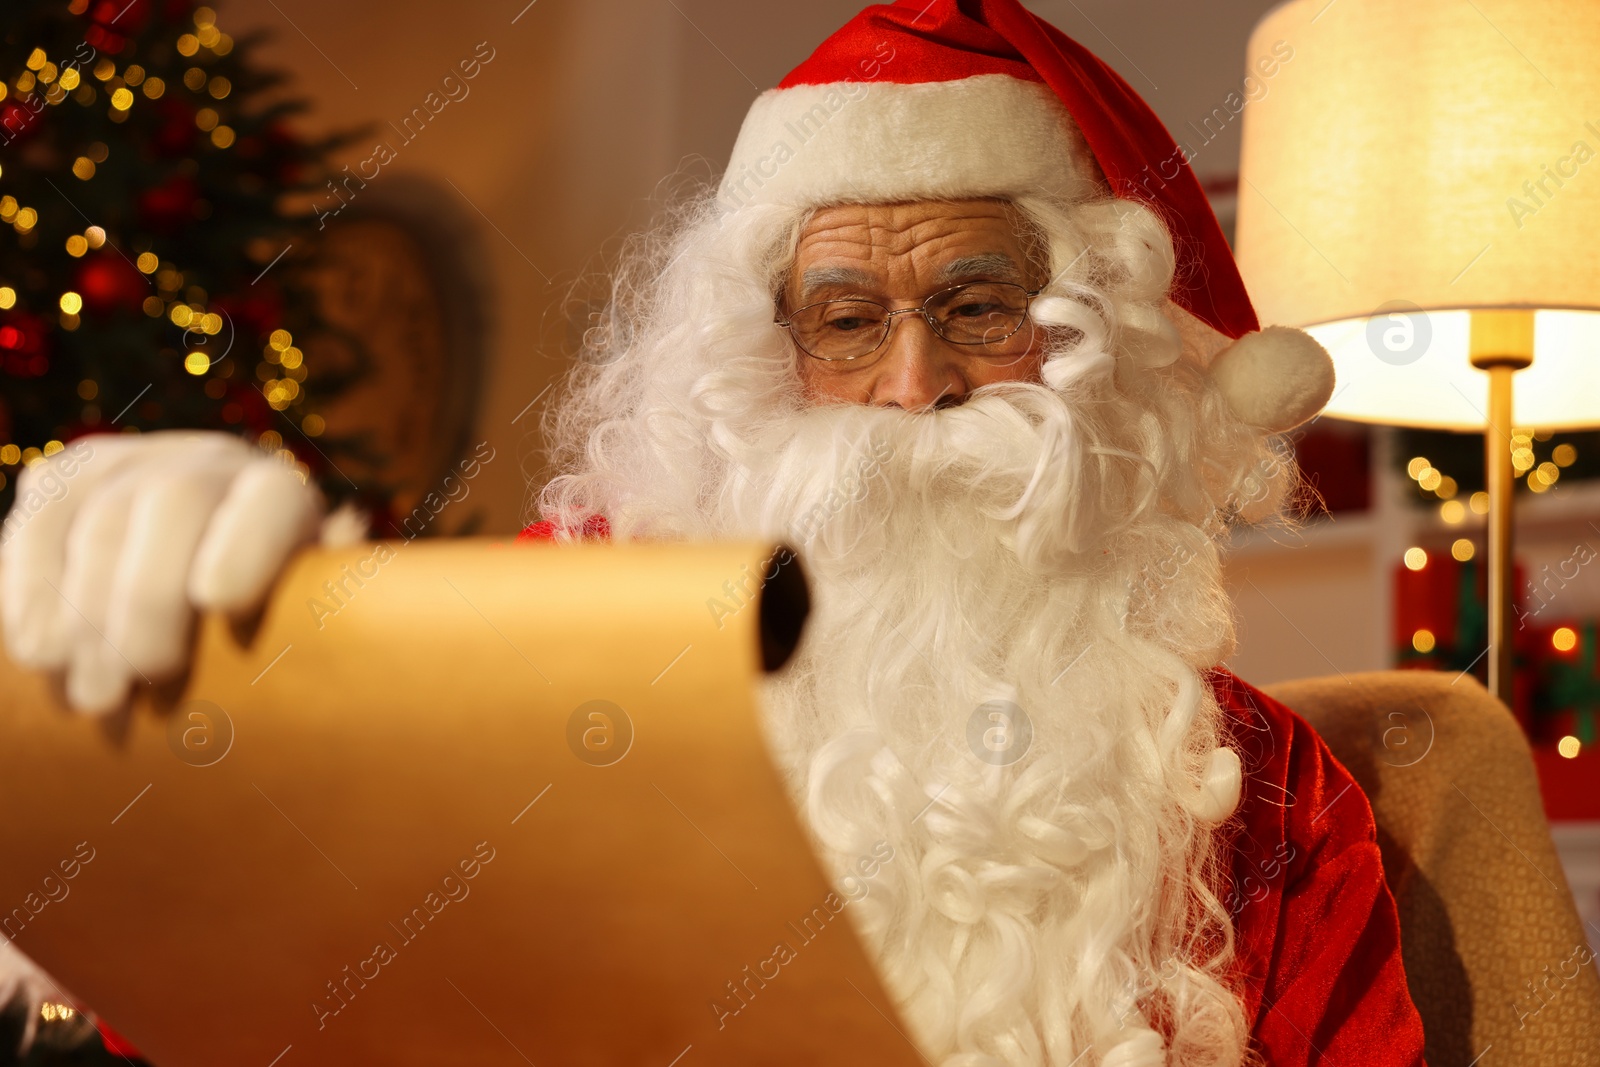 Photo of Santa Claus reading letter in room decorated for Christmas